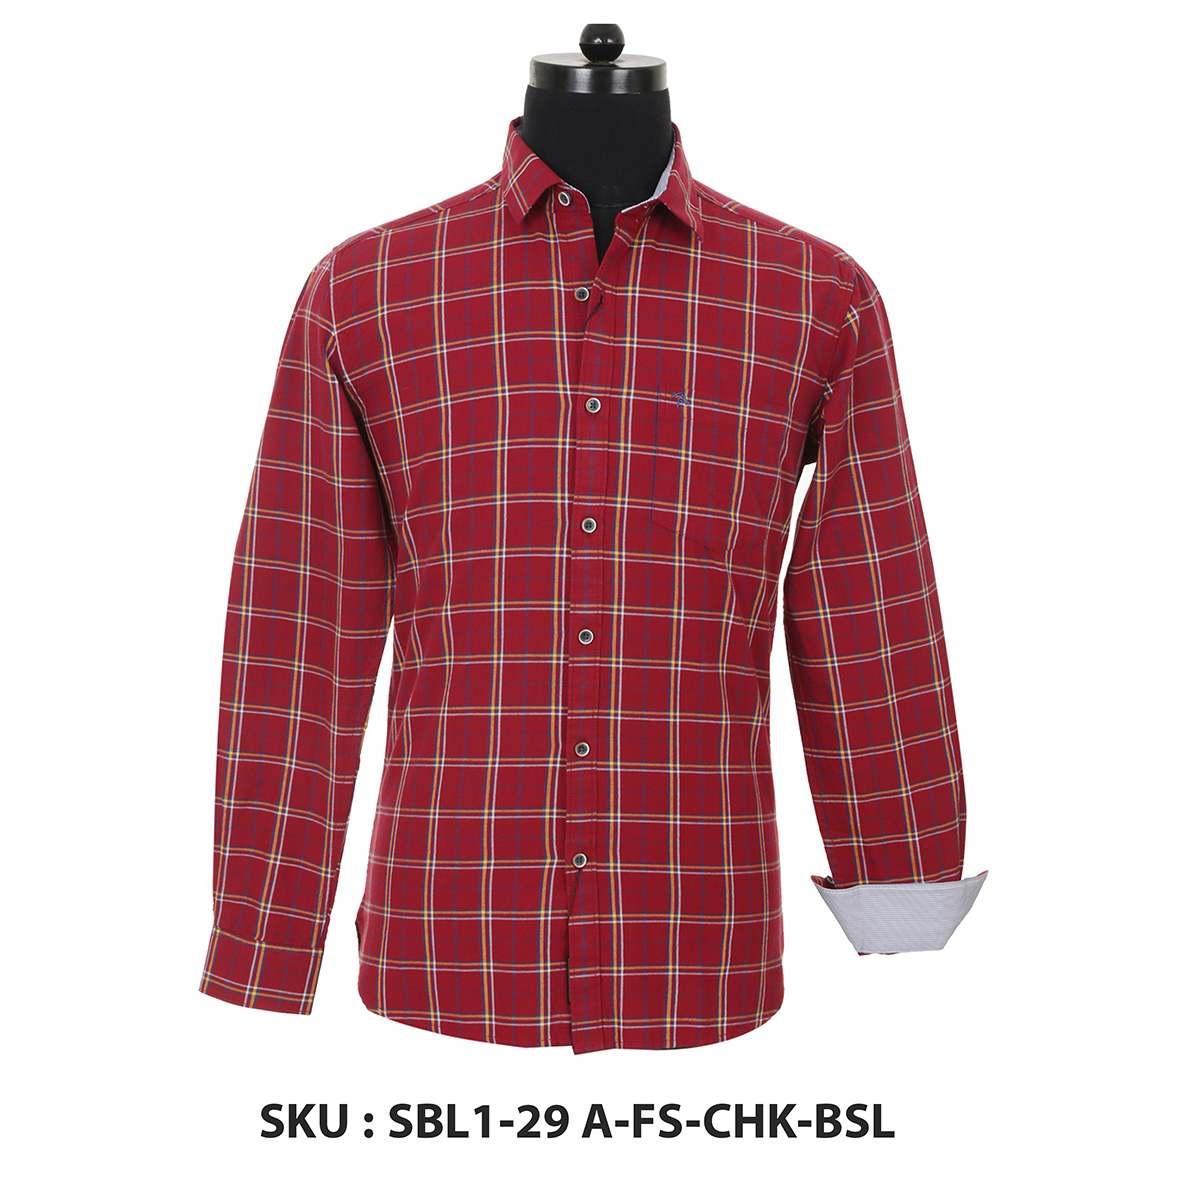 Classic Polo Mens Woven Shirt Sbl1-29 A-Fs-Chk-Bsl Red S